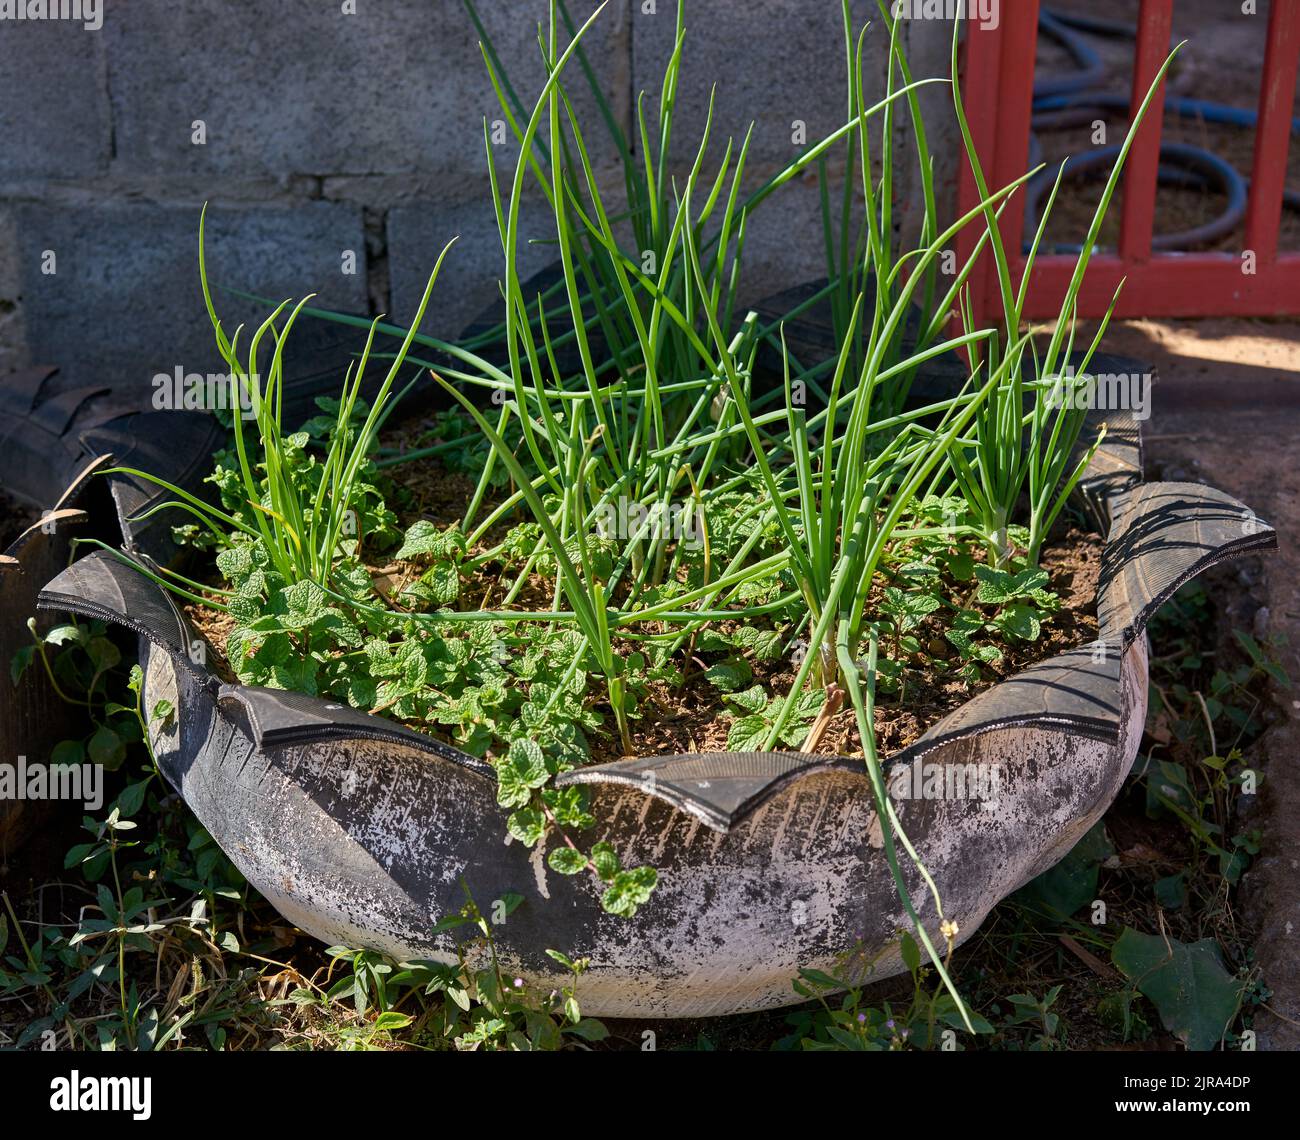 A greta use for recycled rubber tires, used to grow vegetables and herbs in. Stock Photo